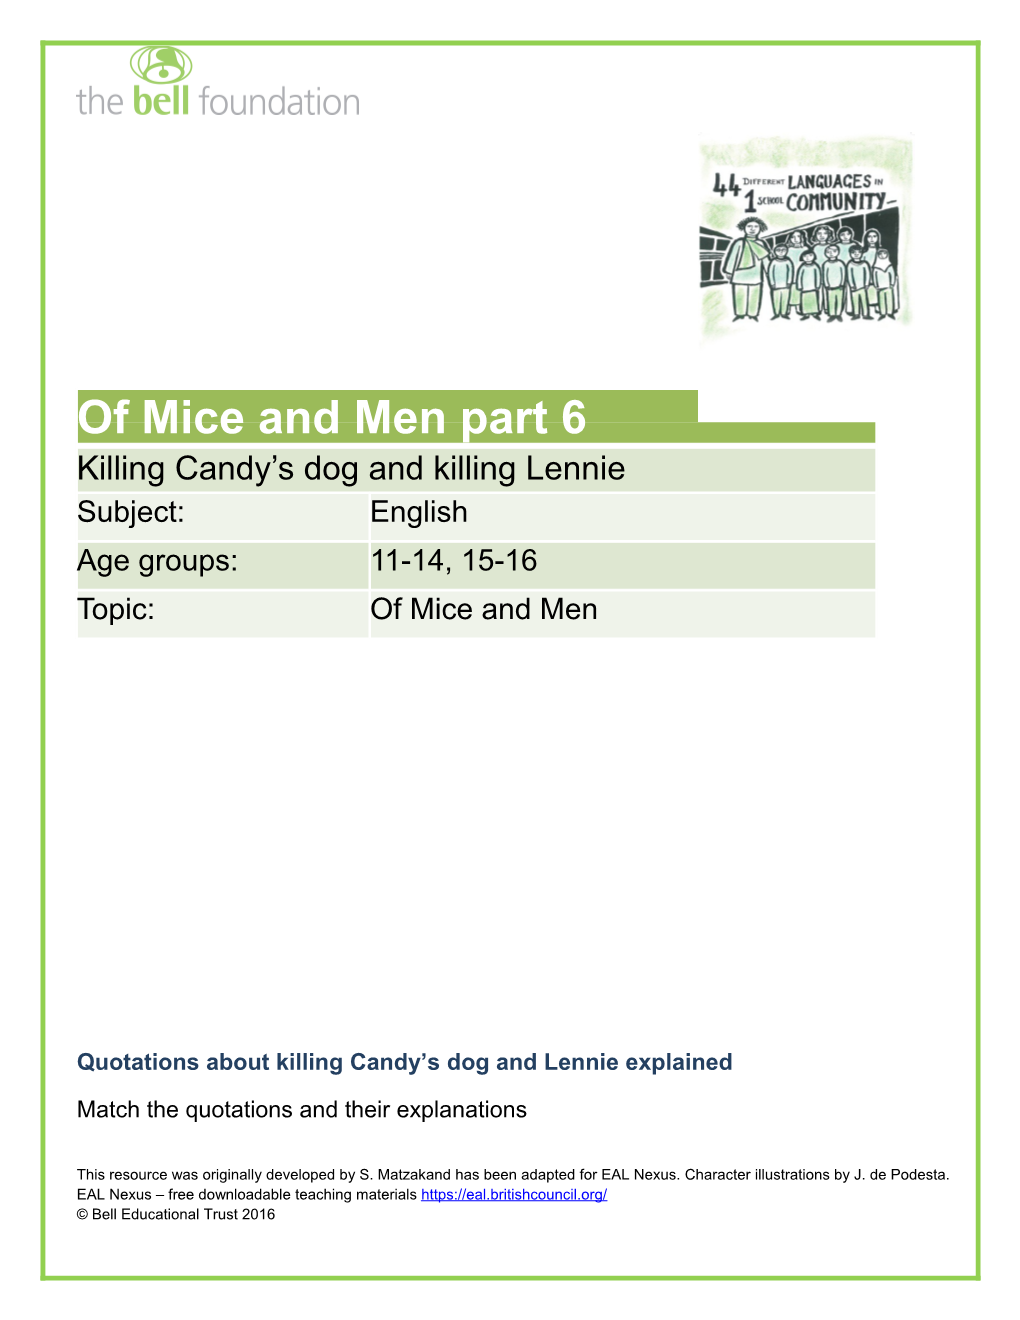 Quotations About Killing Candy S Dog and Lennie Explained